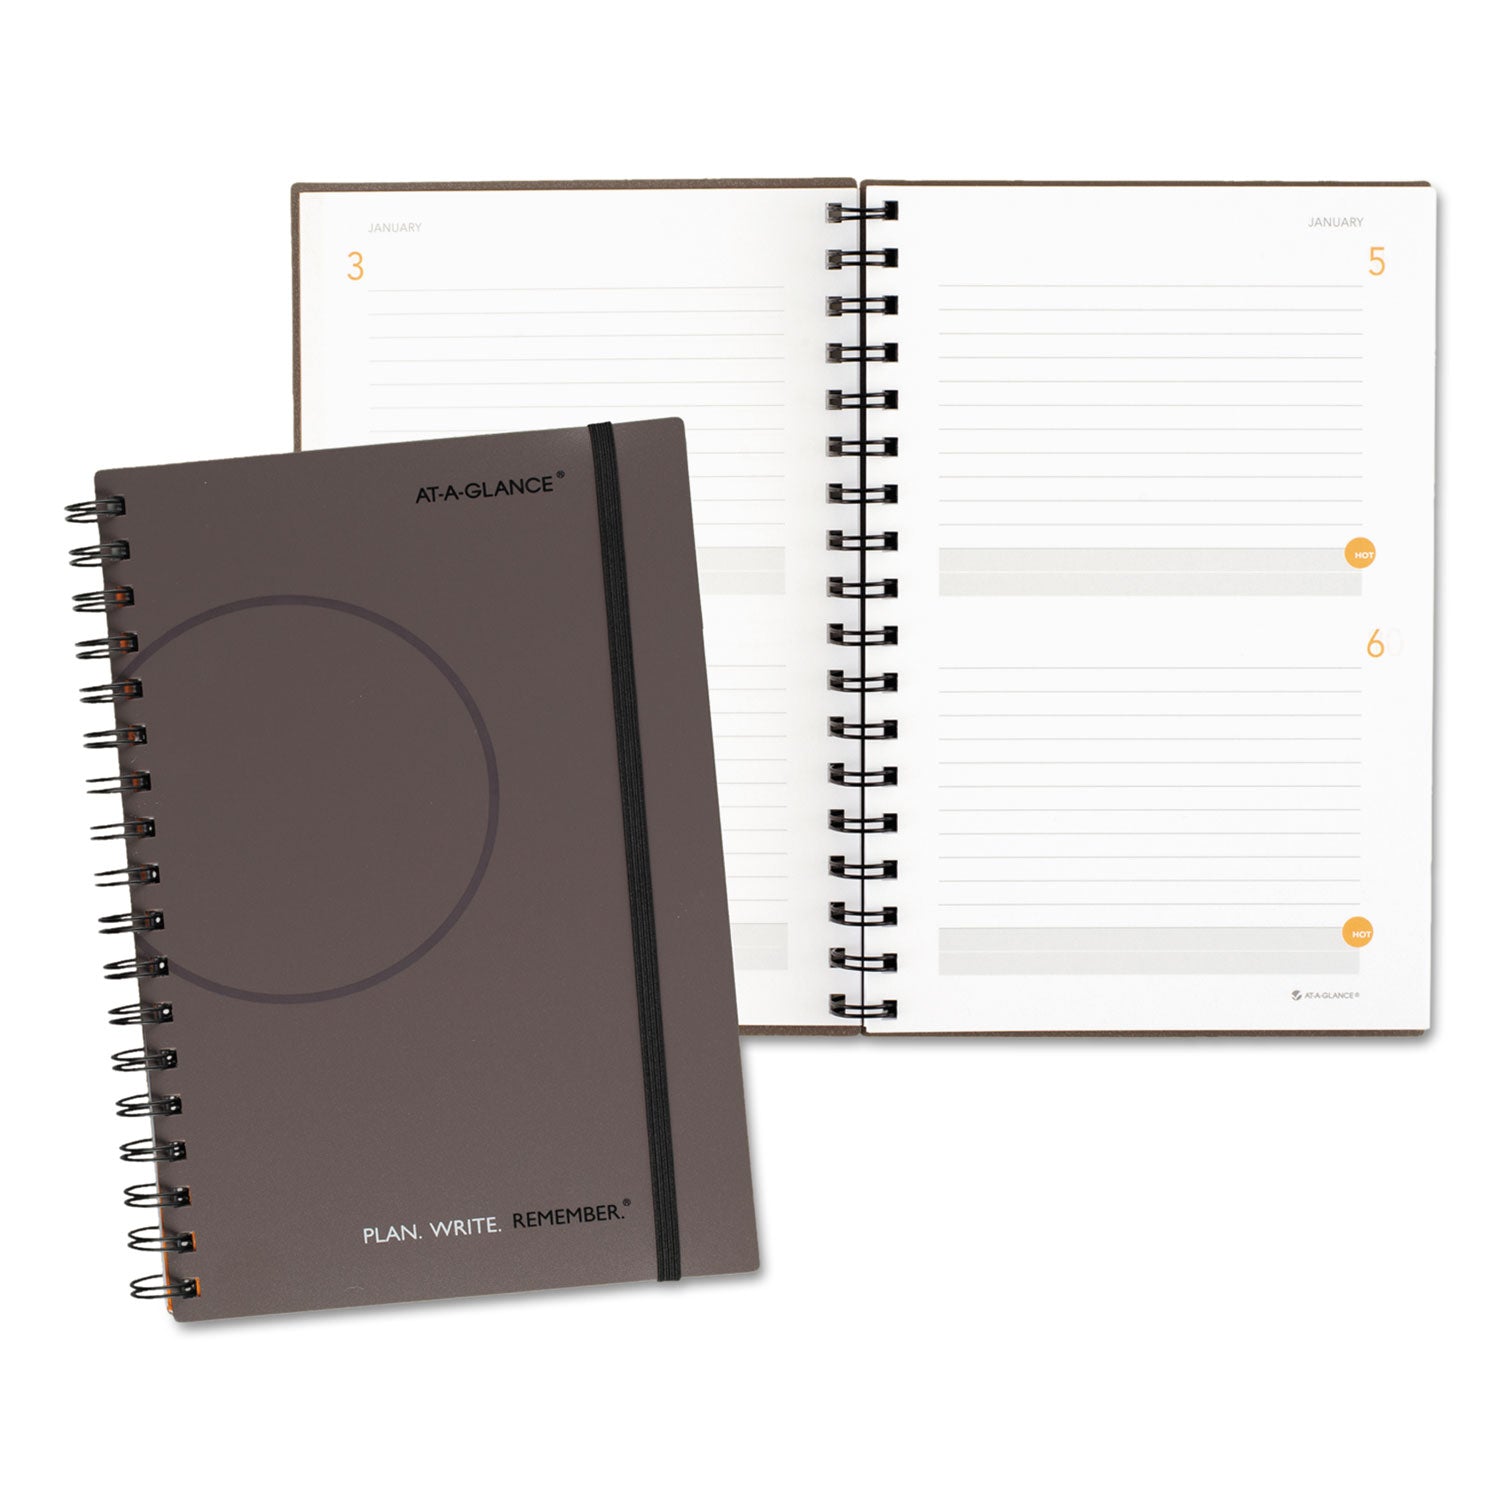 Plan. Write. Remember. Planning Notebook Two Days Per Page , 9 x 6, Gray Cover, Undated - 